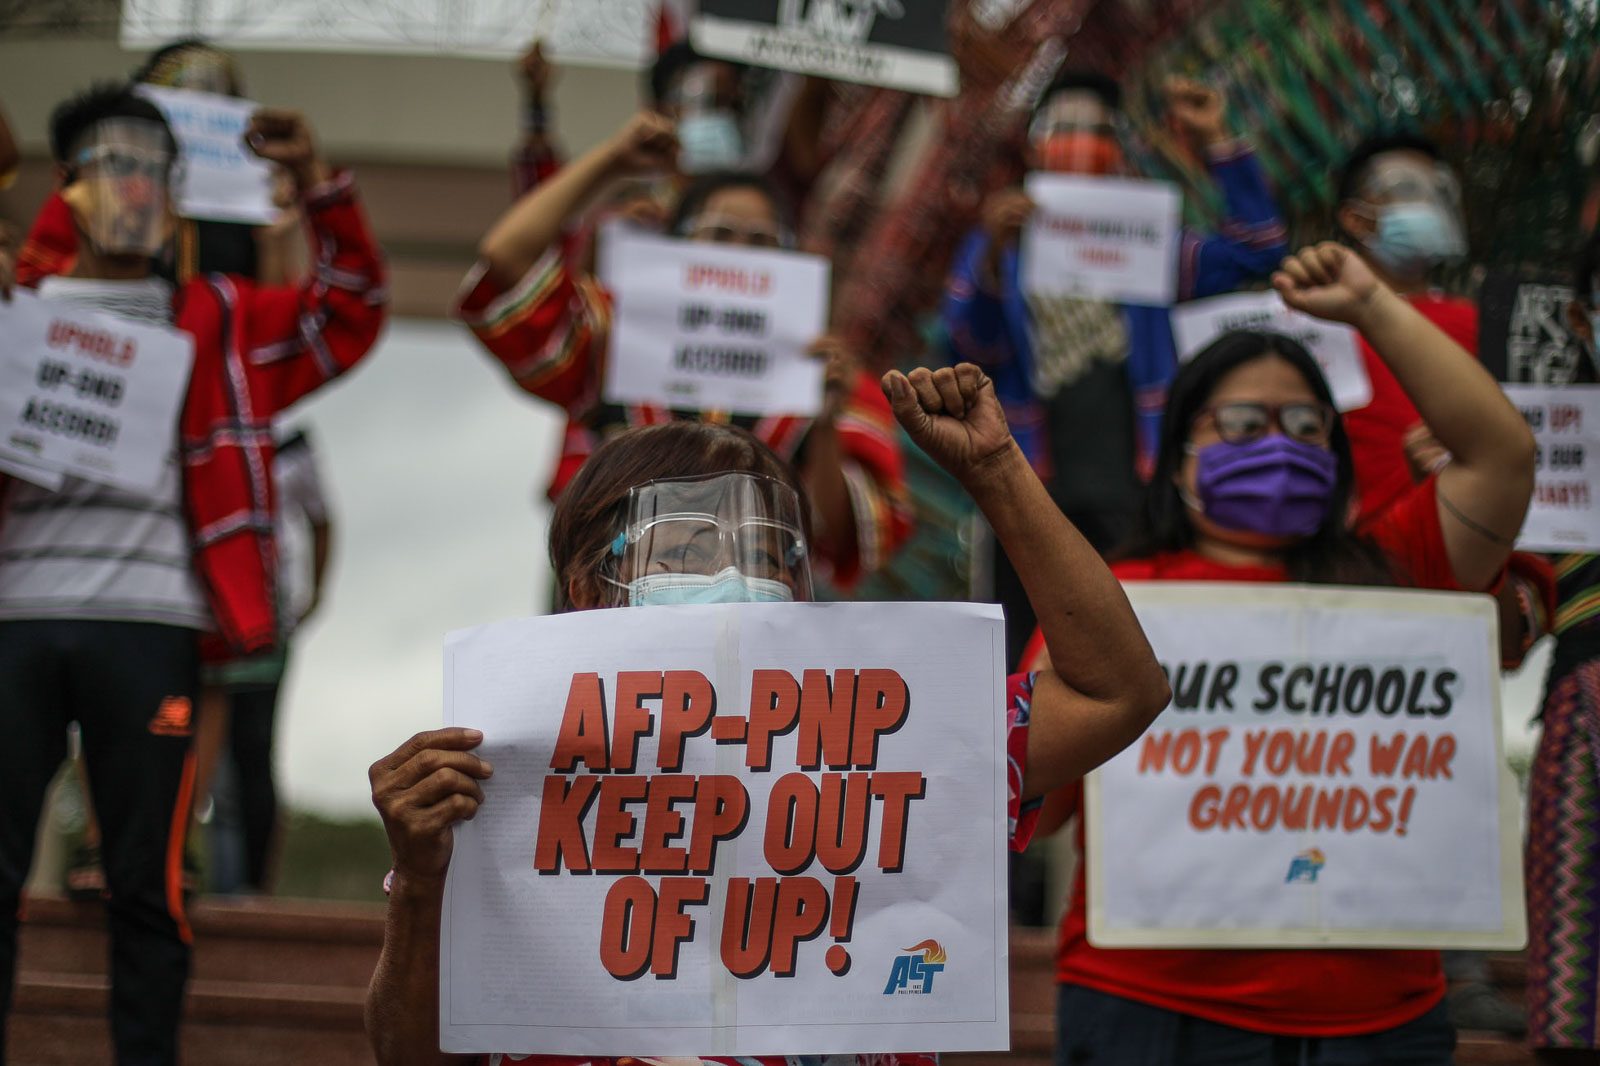 UP’s Nemenzo: With intel funds, ‘unthinkable’ for AFP to make ‘baseless accusations’